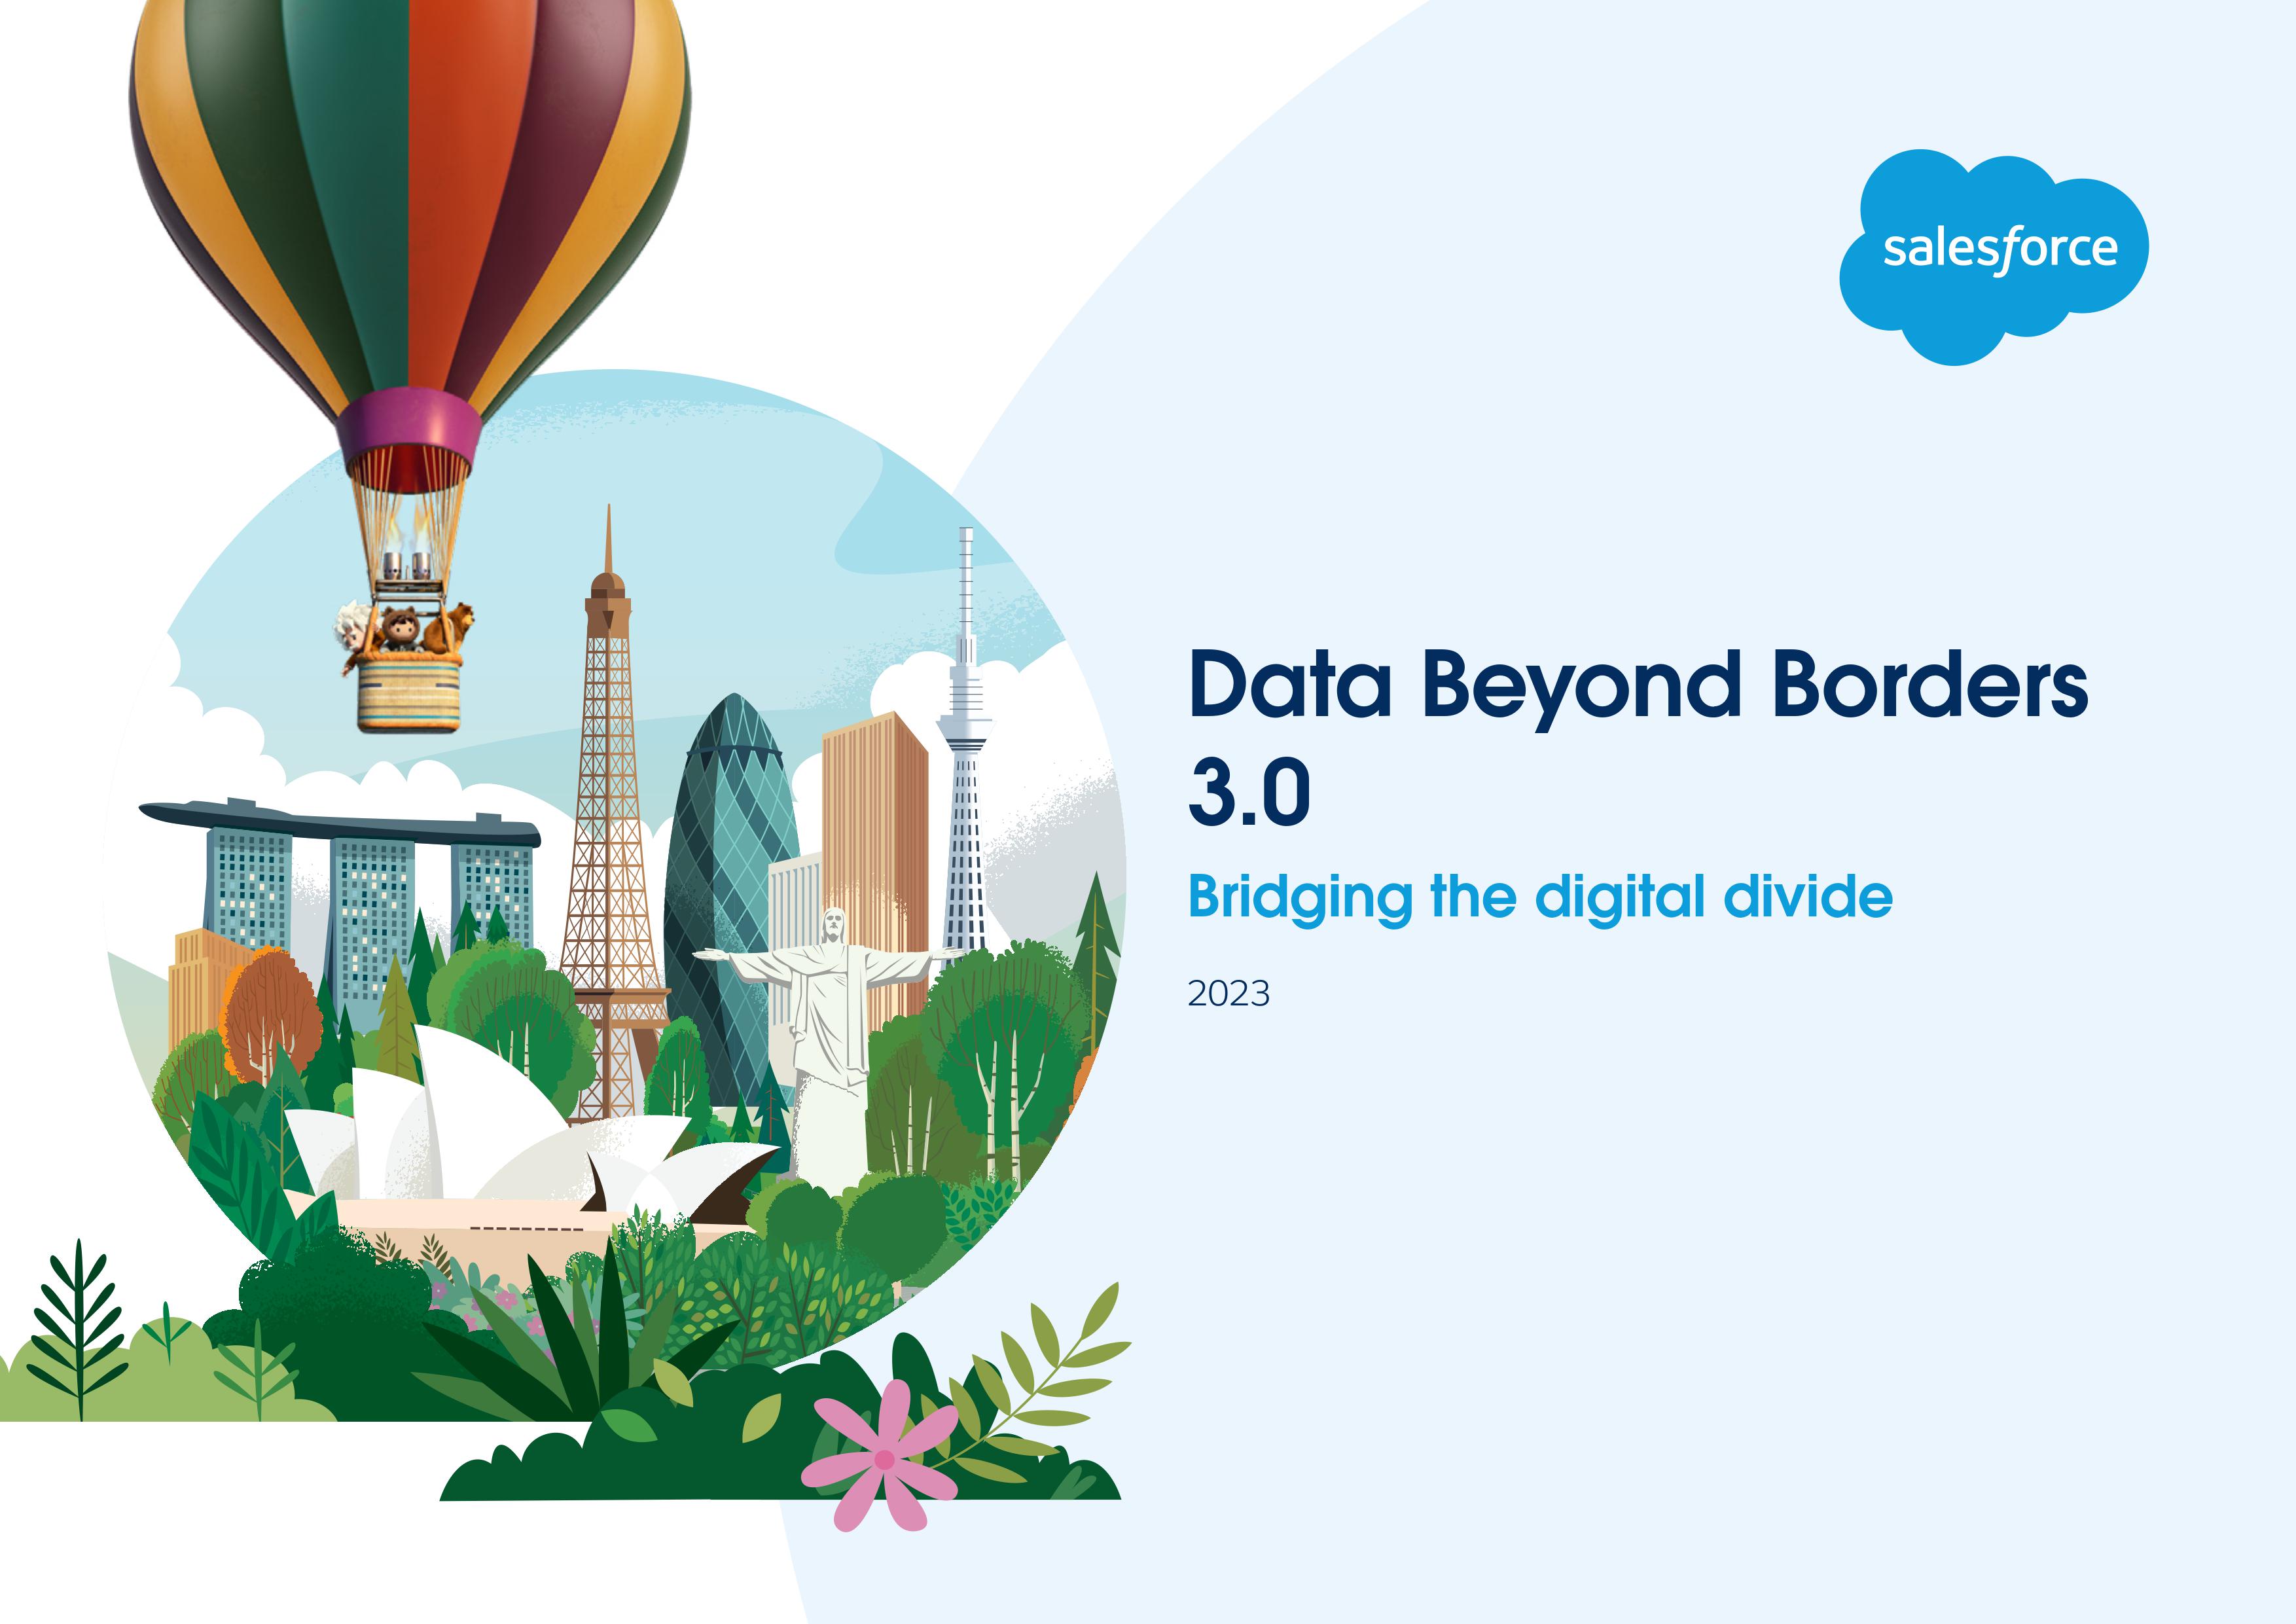 Cross-border data flows improving in ASEAN as countries embrace open data transfer policies: Salesforce